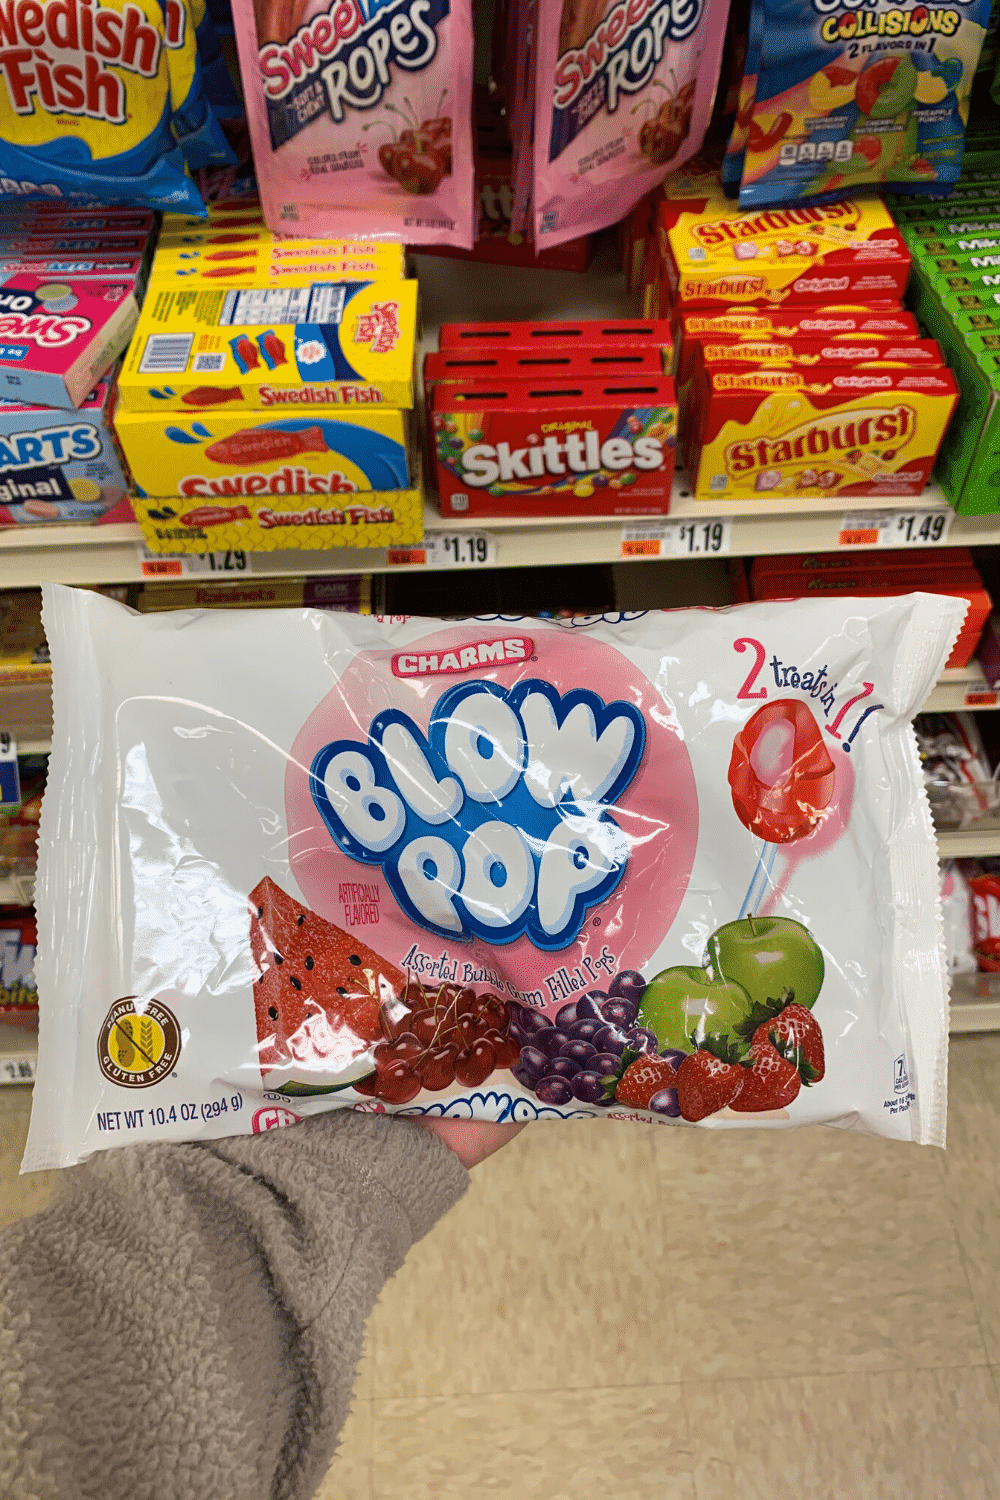 A hand holding a bag of blow pop